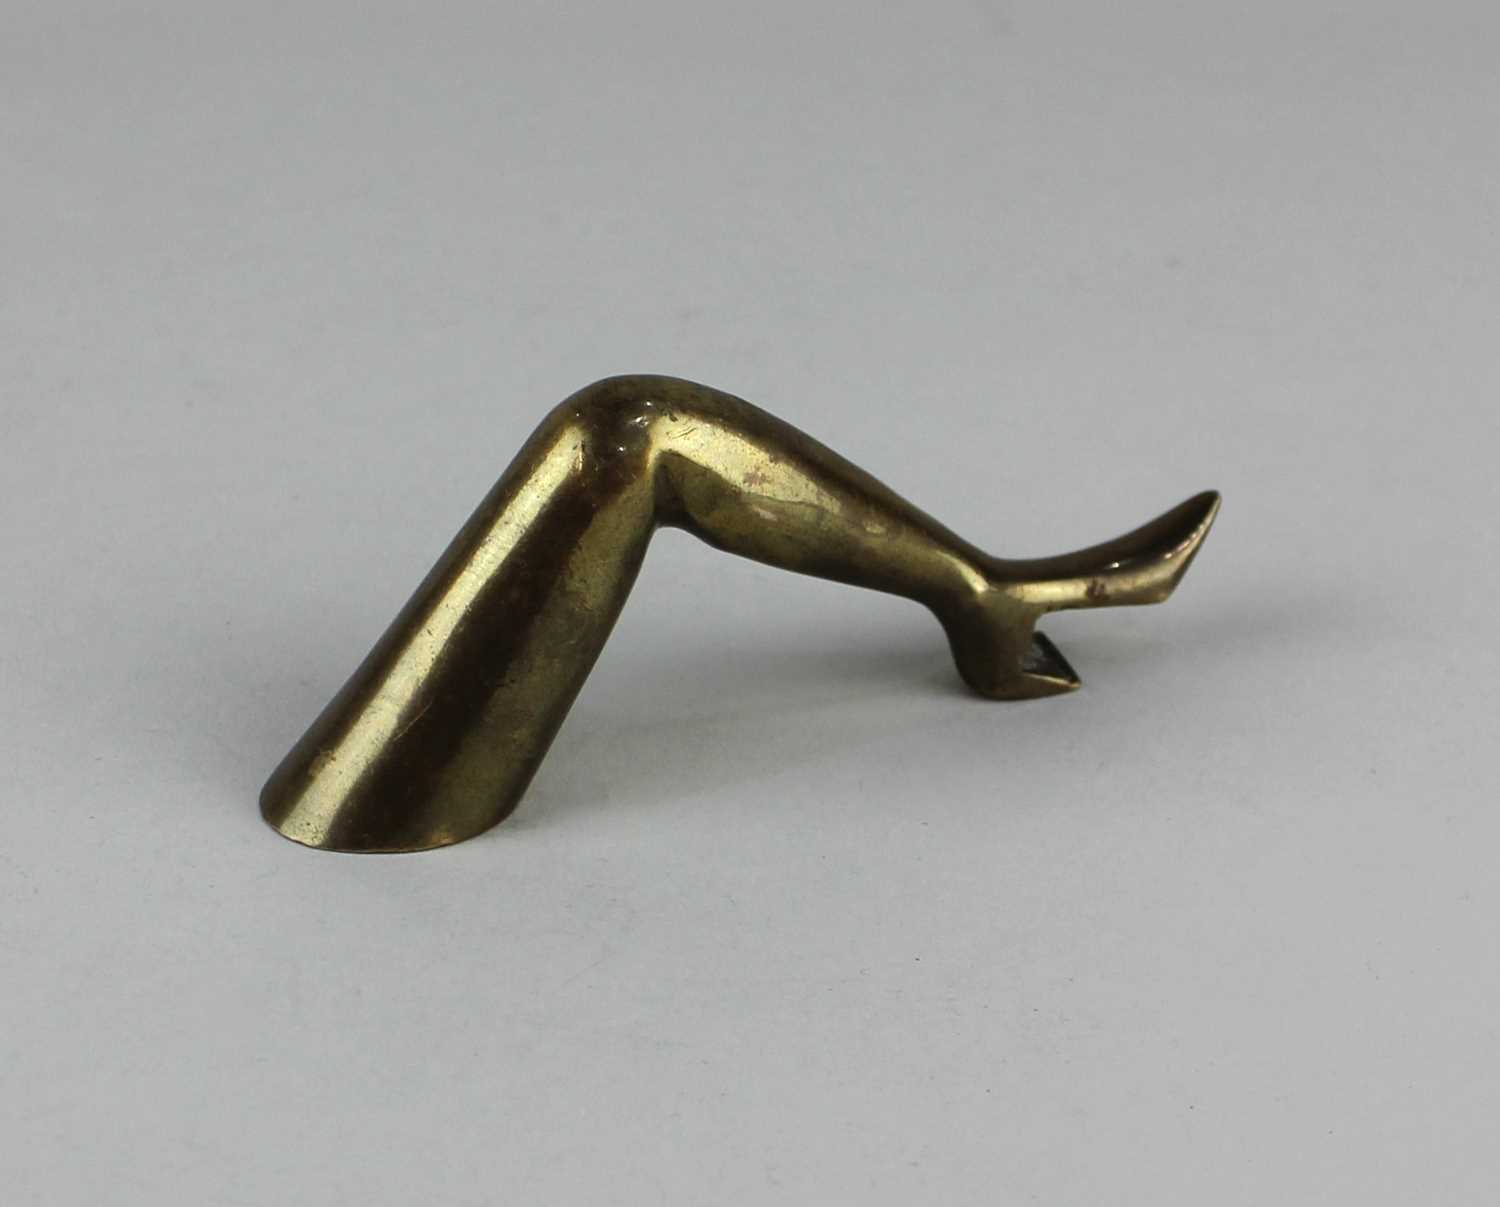 A brass novelty bottle opener in the form of a lady's leg